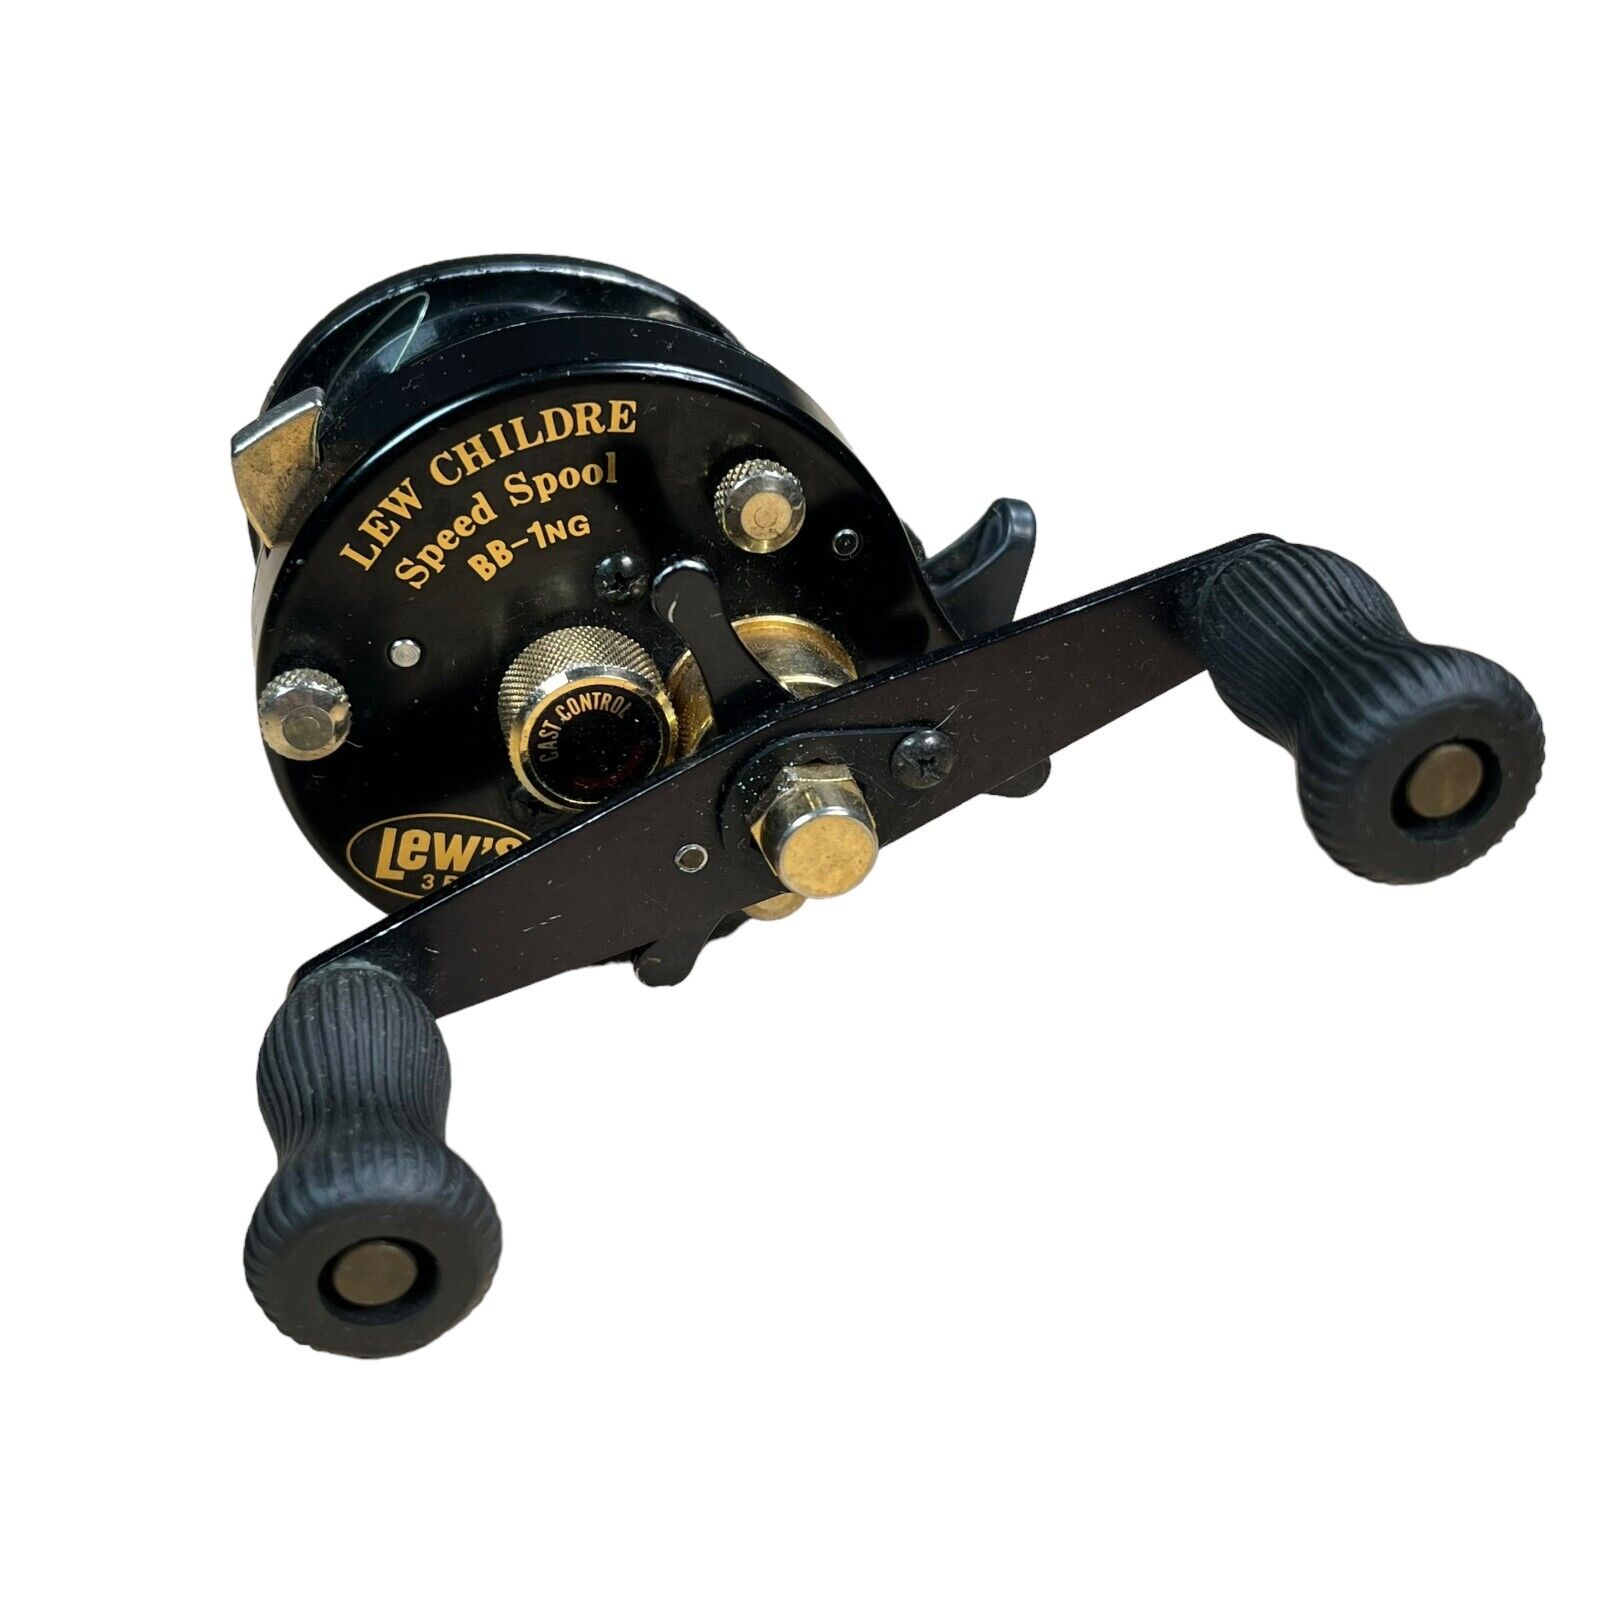 Lew Childre Speed Spool BB-1NG Casting Fishing Reel